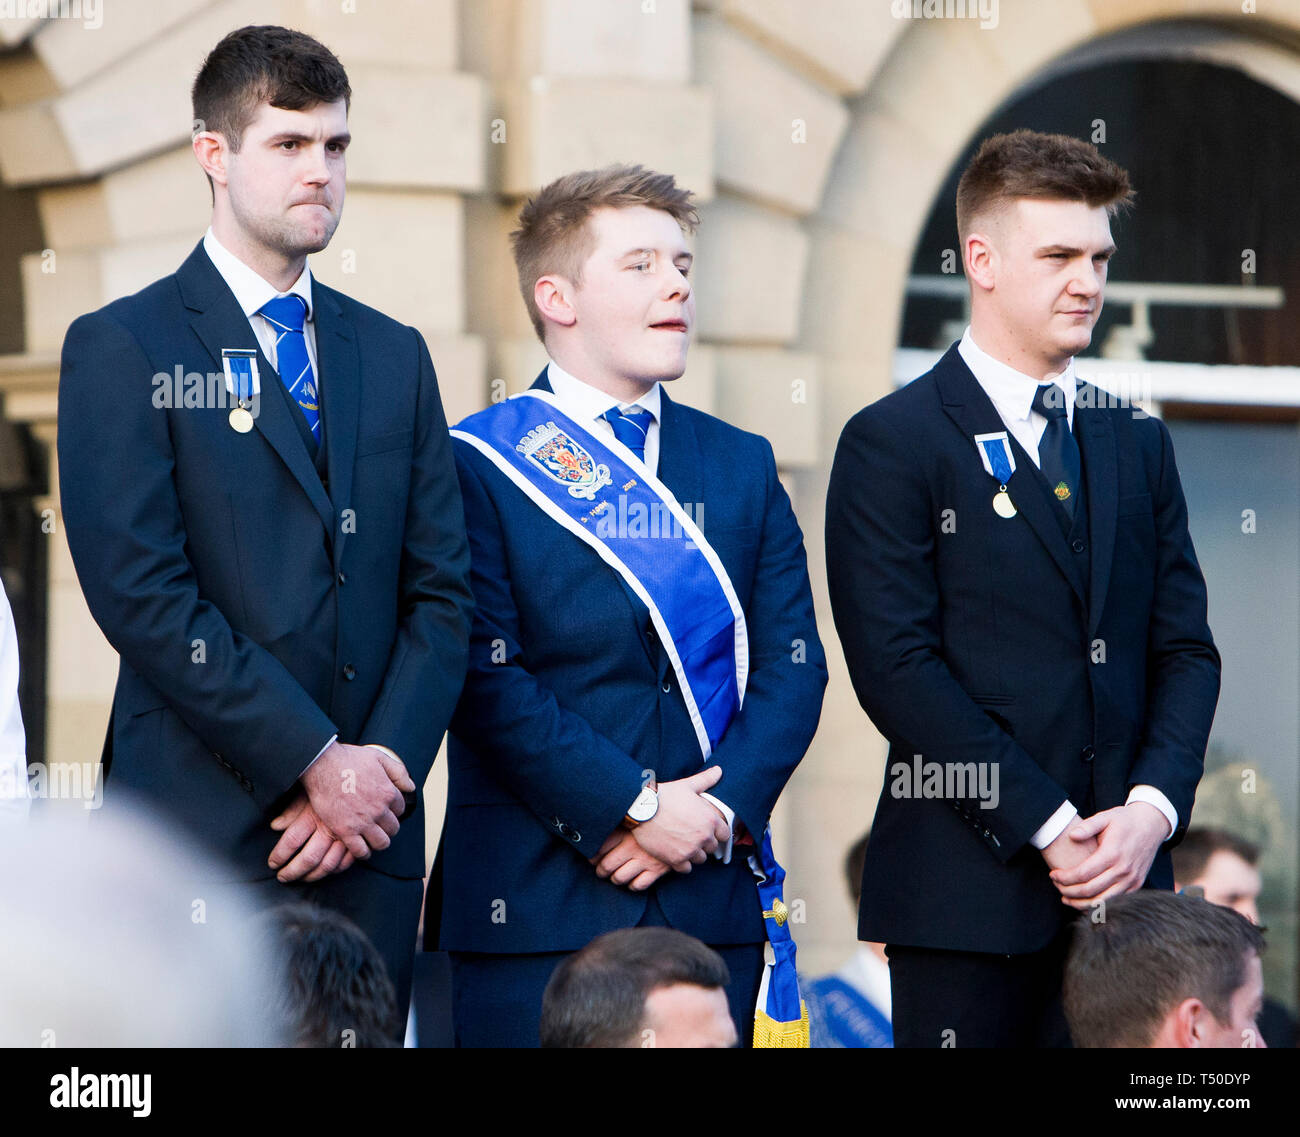 Kelso, Scottish Borders, UK. April 19 2019. The residents of Kelso gather in the town square to watch the announcement of Mark Henderson being named as the 2019 Kelso Laddie in Kelso Square on April 19 2019 in Kelso, UK. Credit: Scottish Borders Media/Alamy Live News Stock Photo